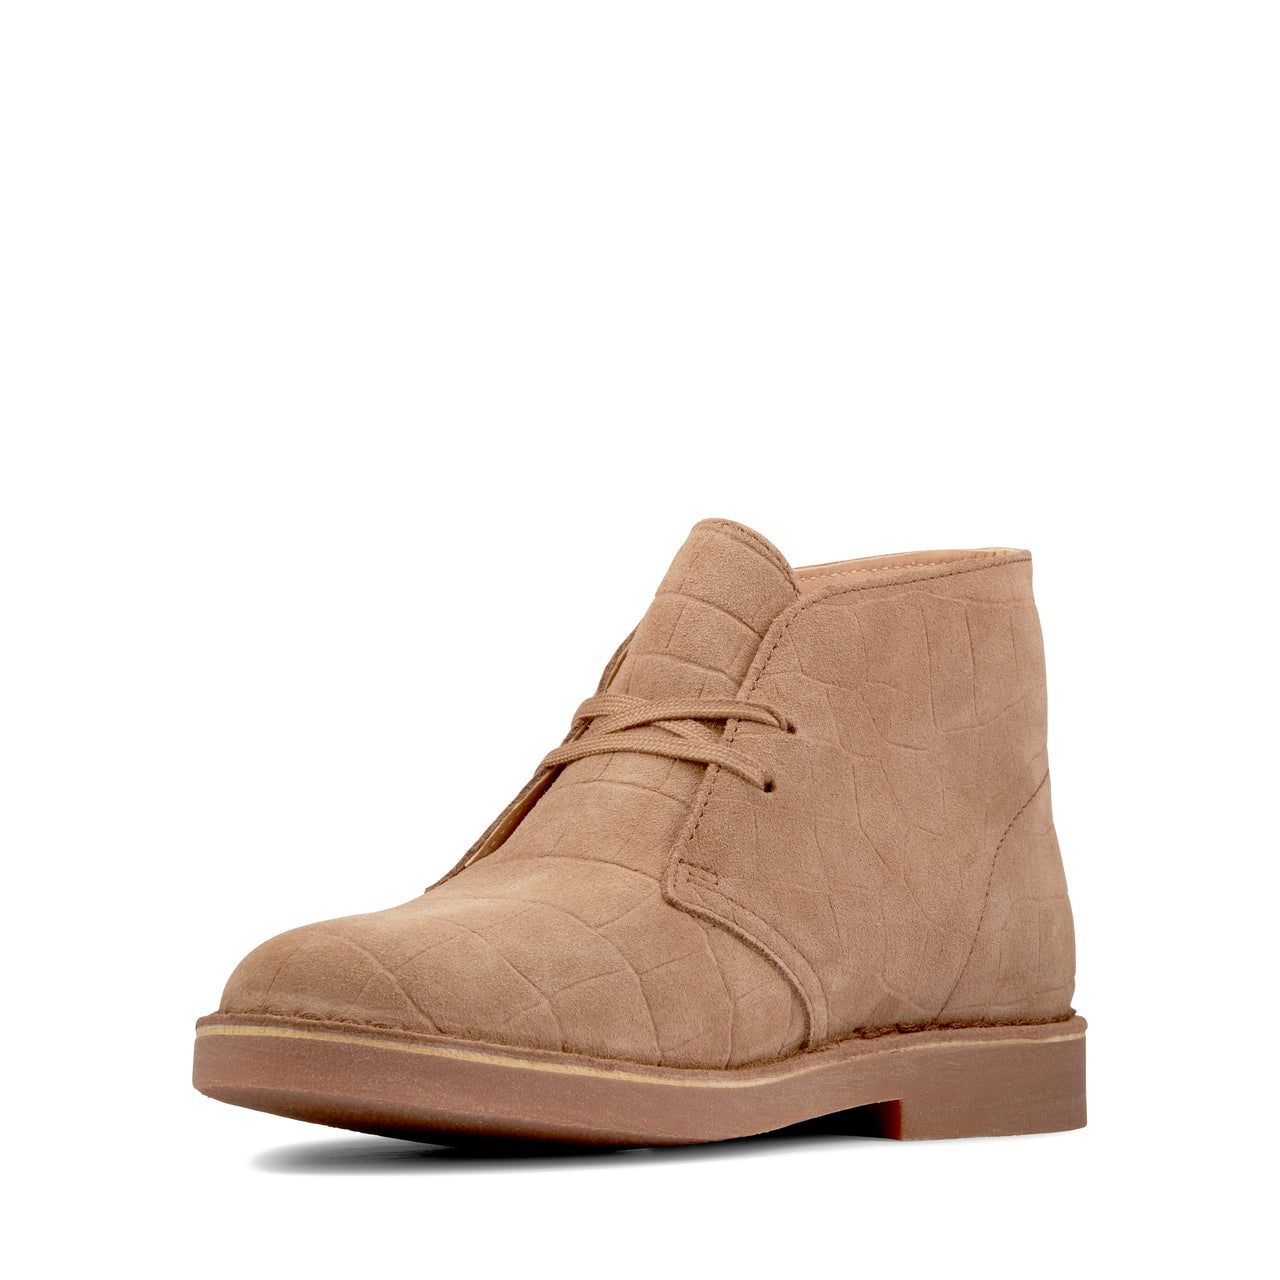  Angled view of Clarks Womens Desert Boot 2 in taupe distressed suede